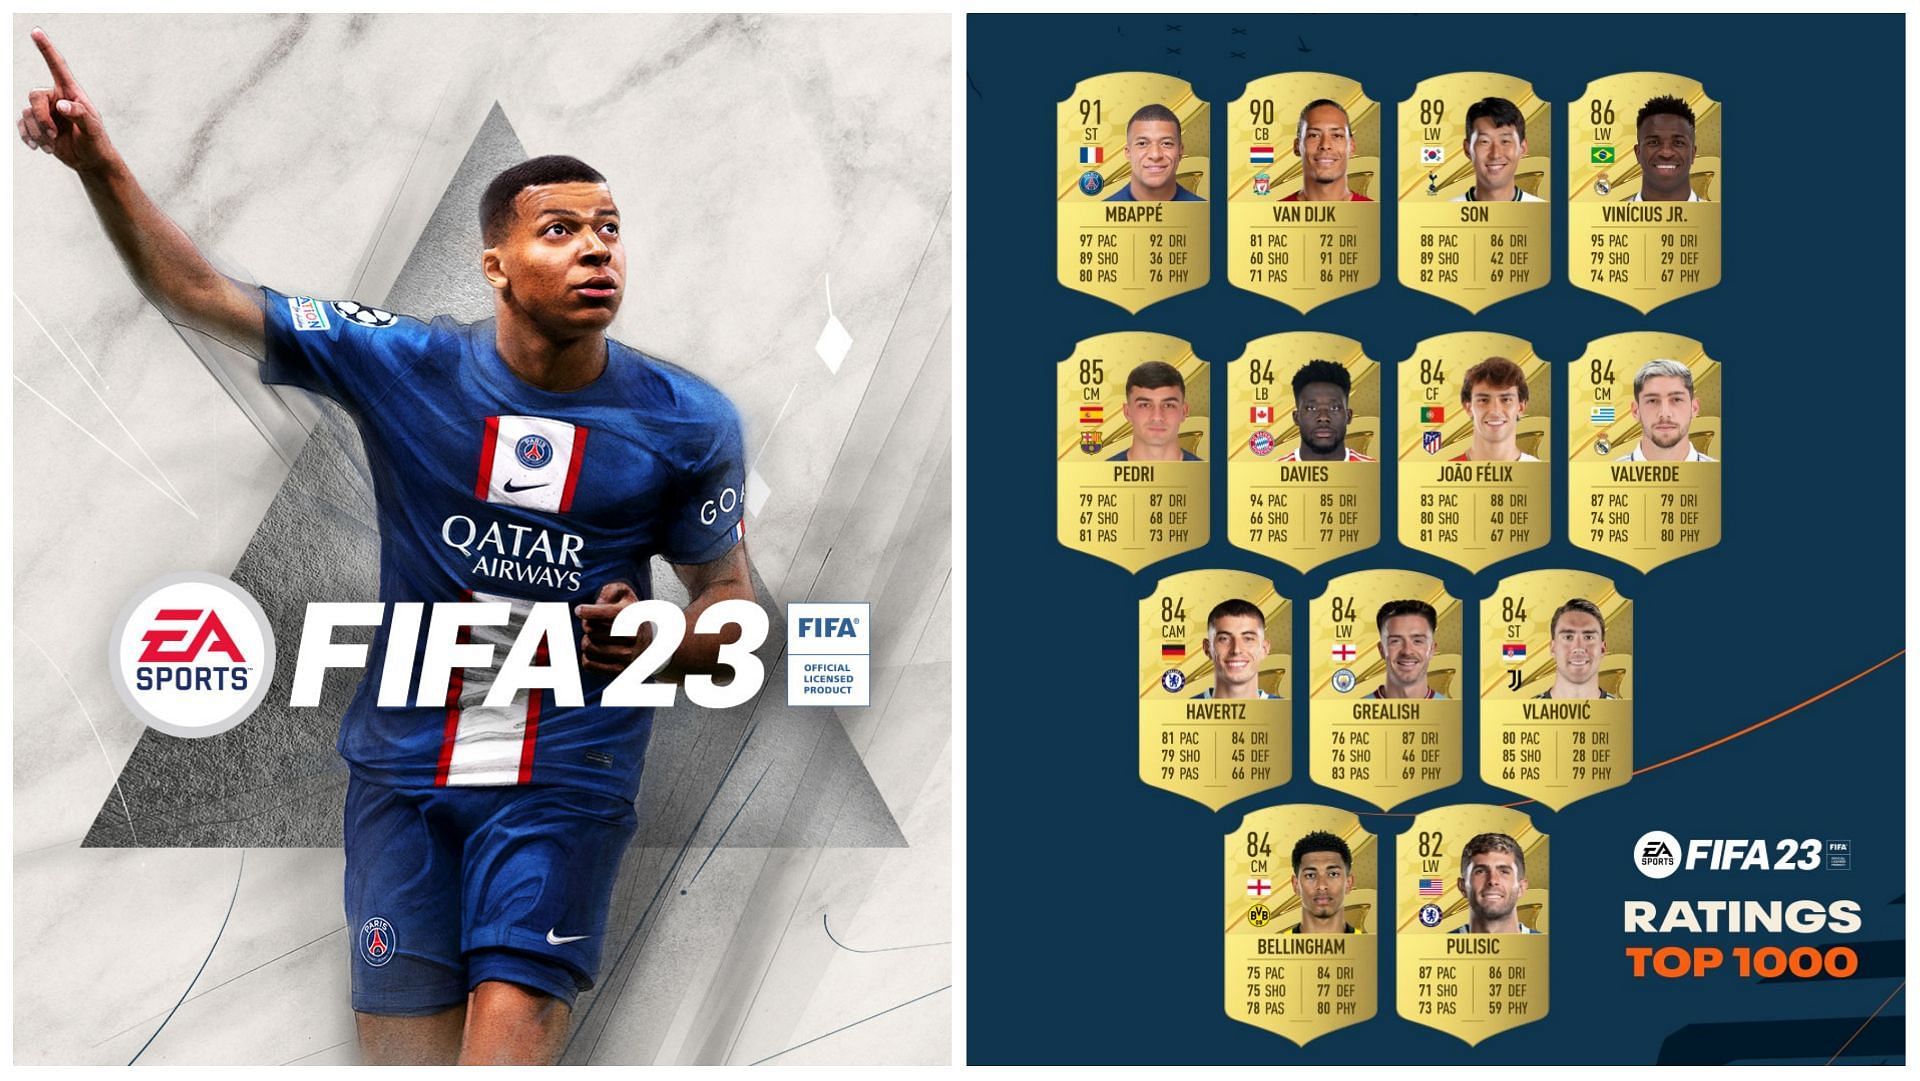 EA Sports has revealed the top 1000 highest rated players in FIFA 23 (Images via EA Sports)